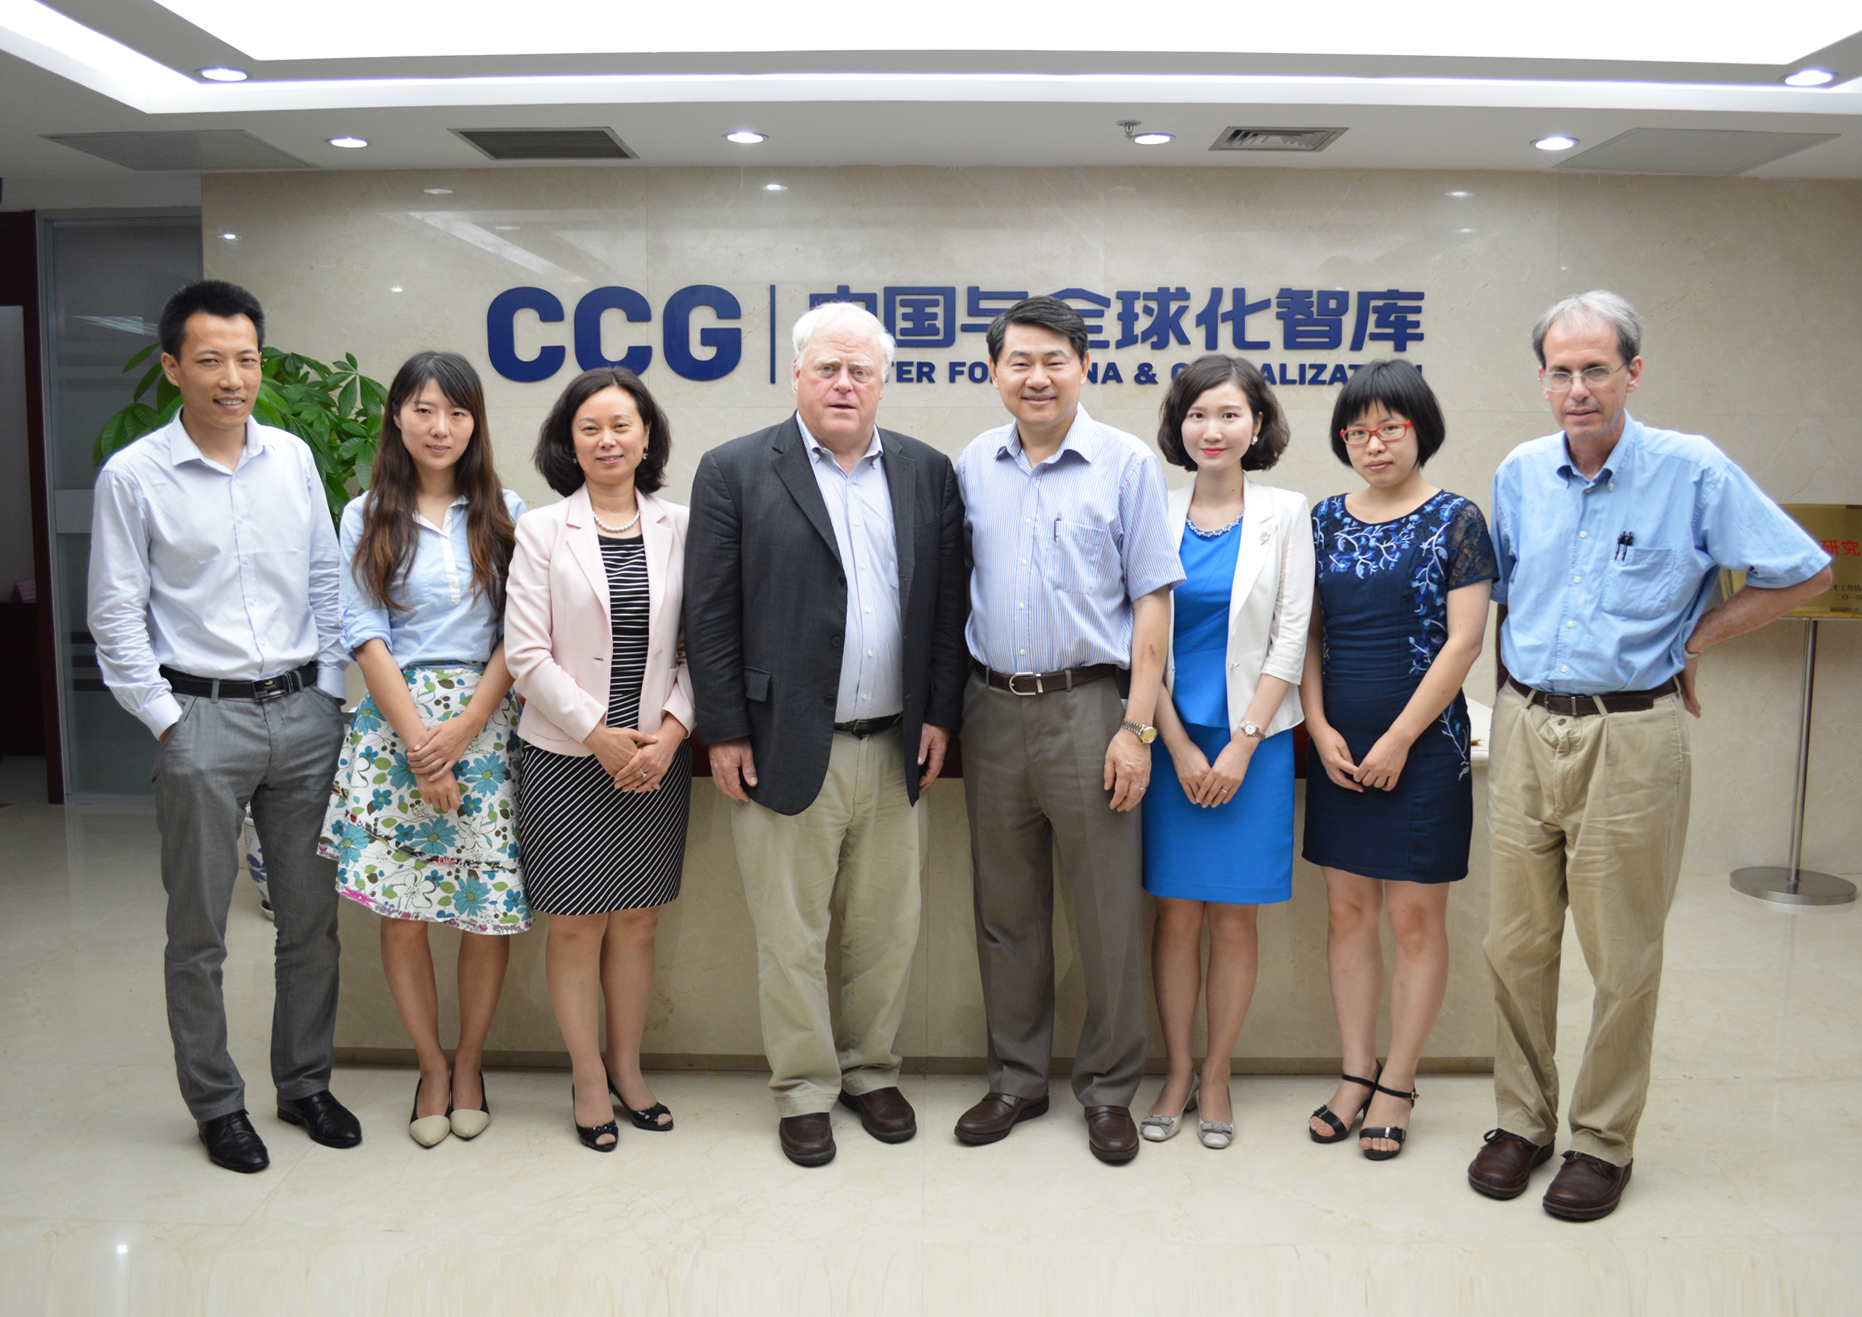 James G. McGann, a professor at the University of Pennsylvania, Center for China and Globalization President Dr. Wang Huiyao and others pose for a group photo at CCG offices in Beijing after a roundtable on the development of China's think tank on June 24, 2015. [China.org.cn]